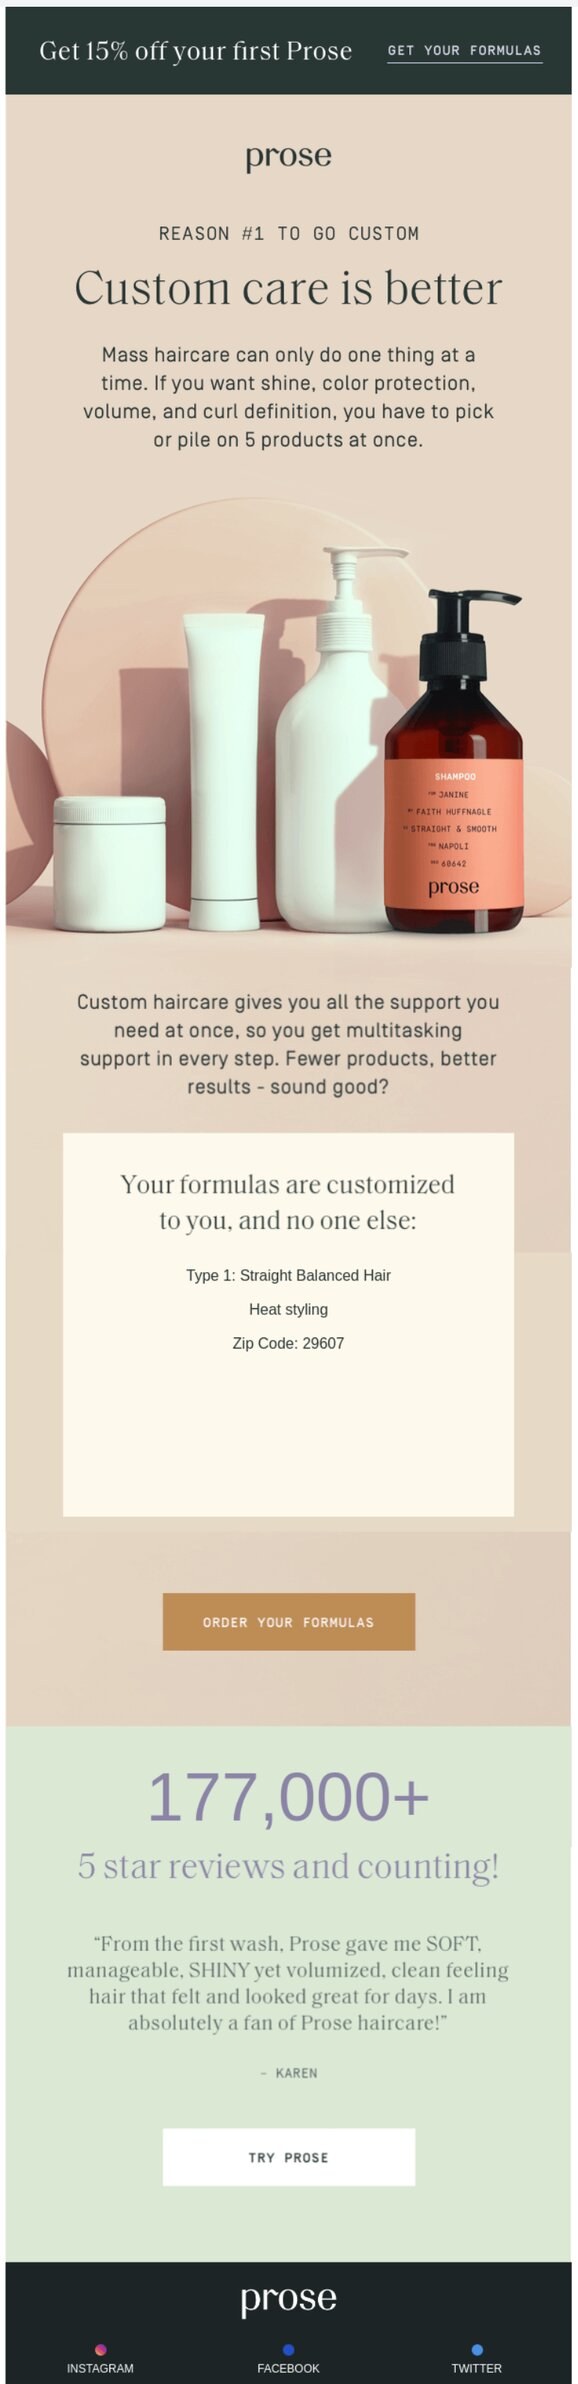 hair care email example: prose